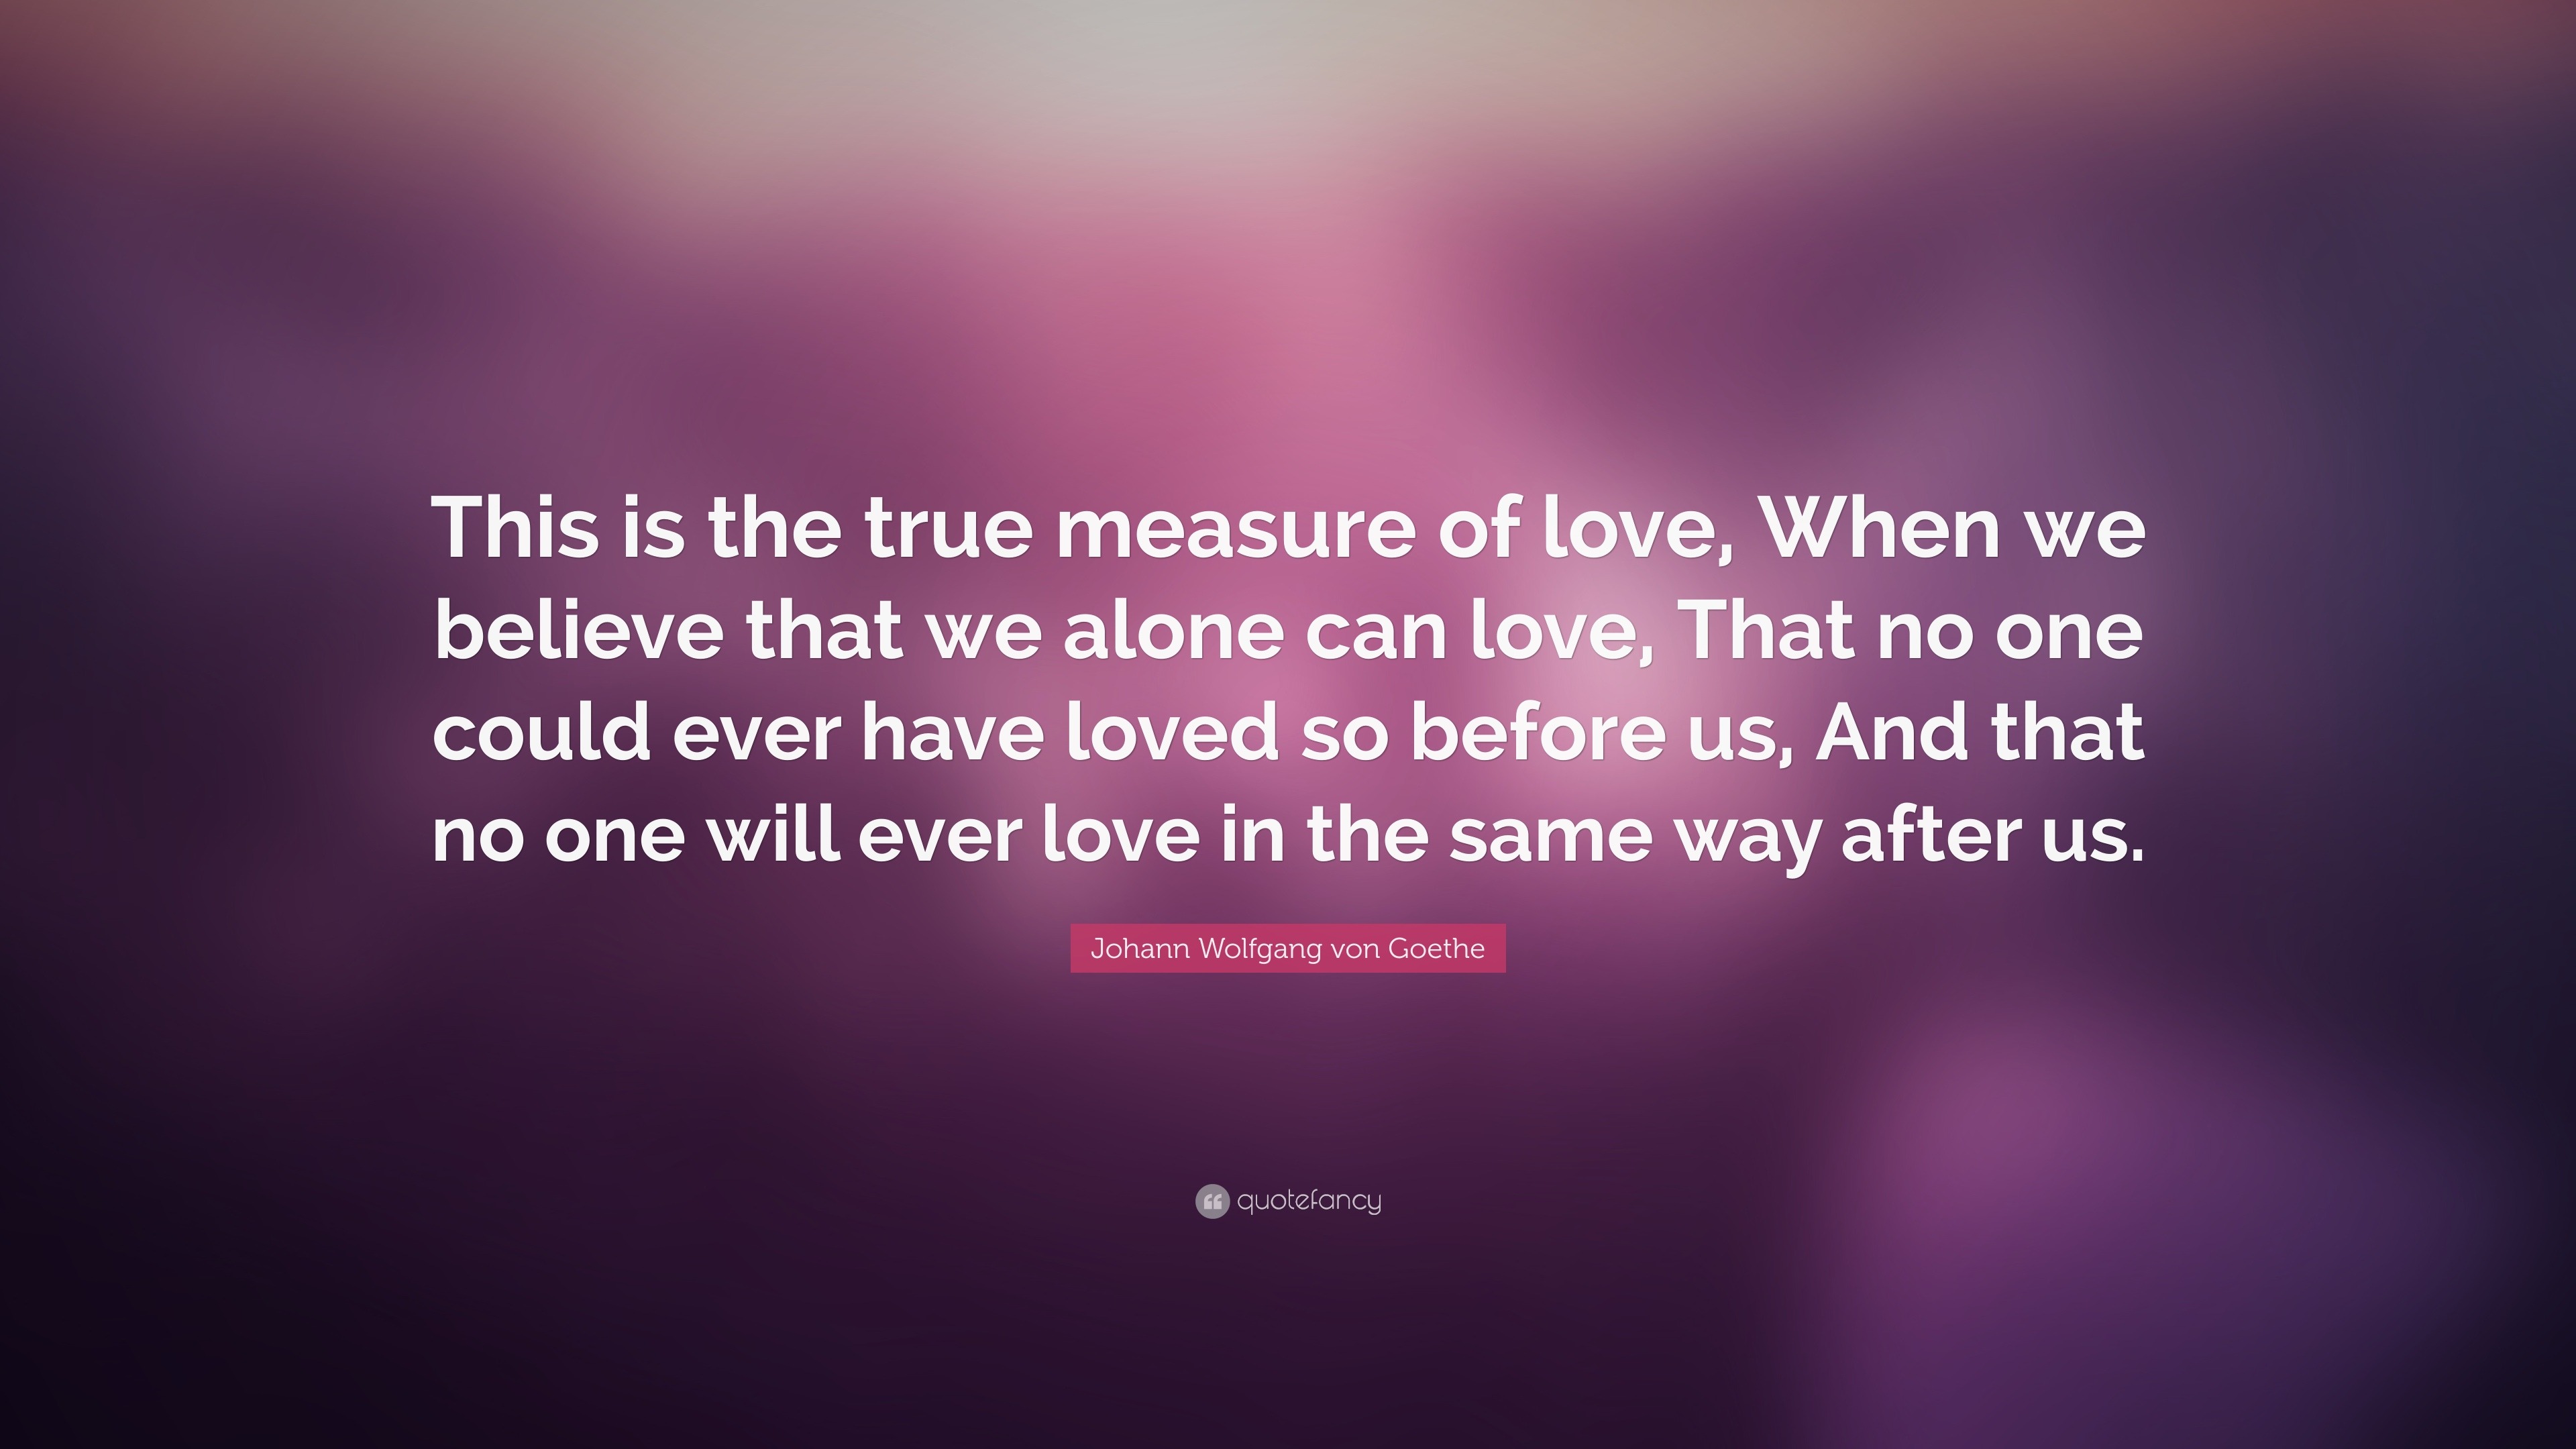 Johann Wolfgang von Goethe Quote “This is the true measure of love When